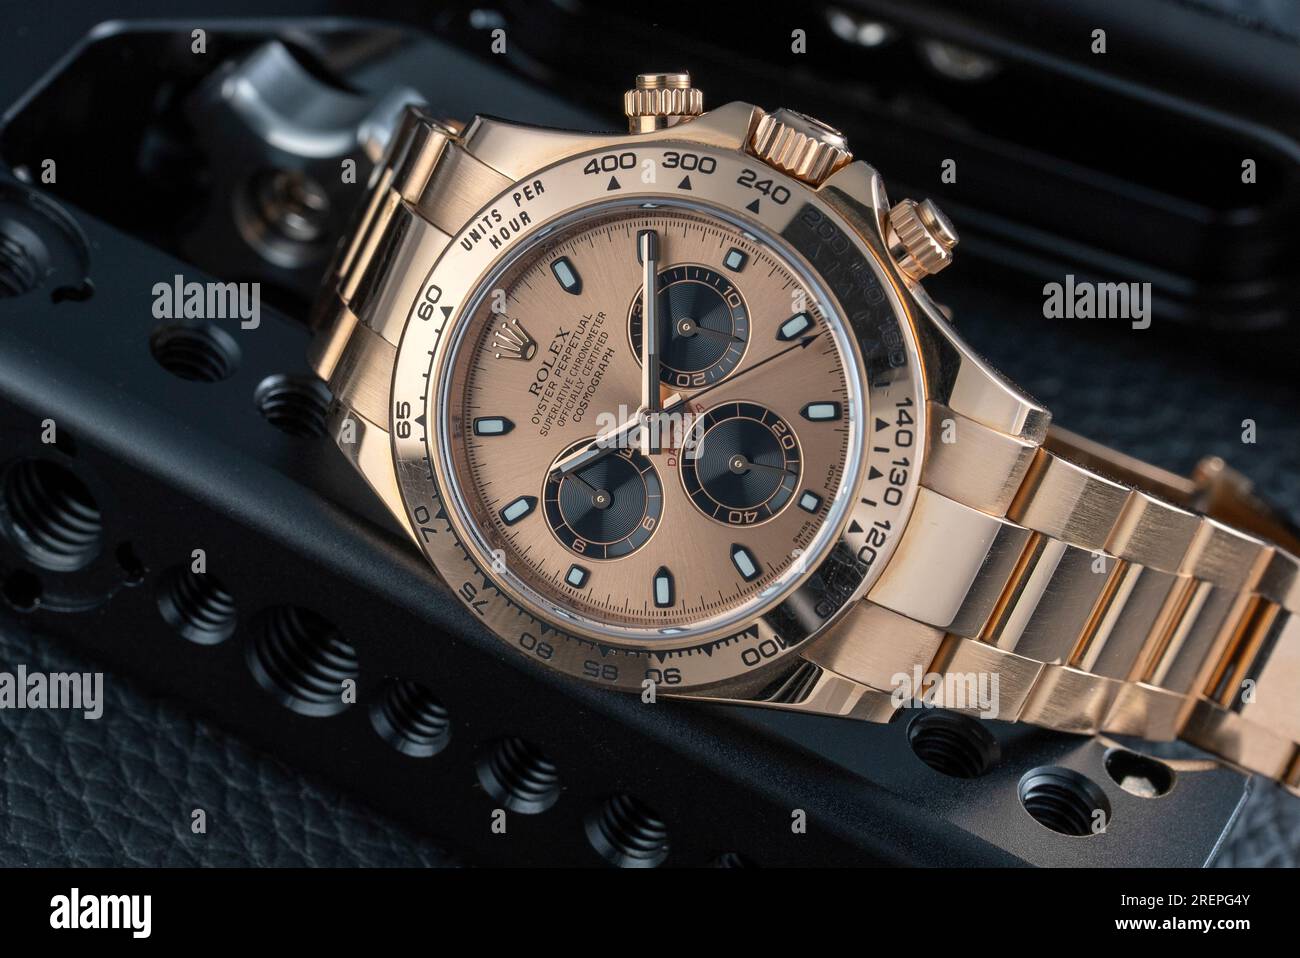 Photoshoot with the Rolex Daytona 116505 in Everose Gold Stock Photo